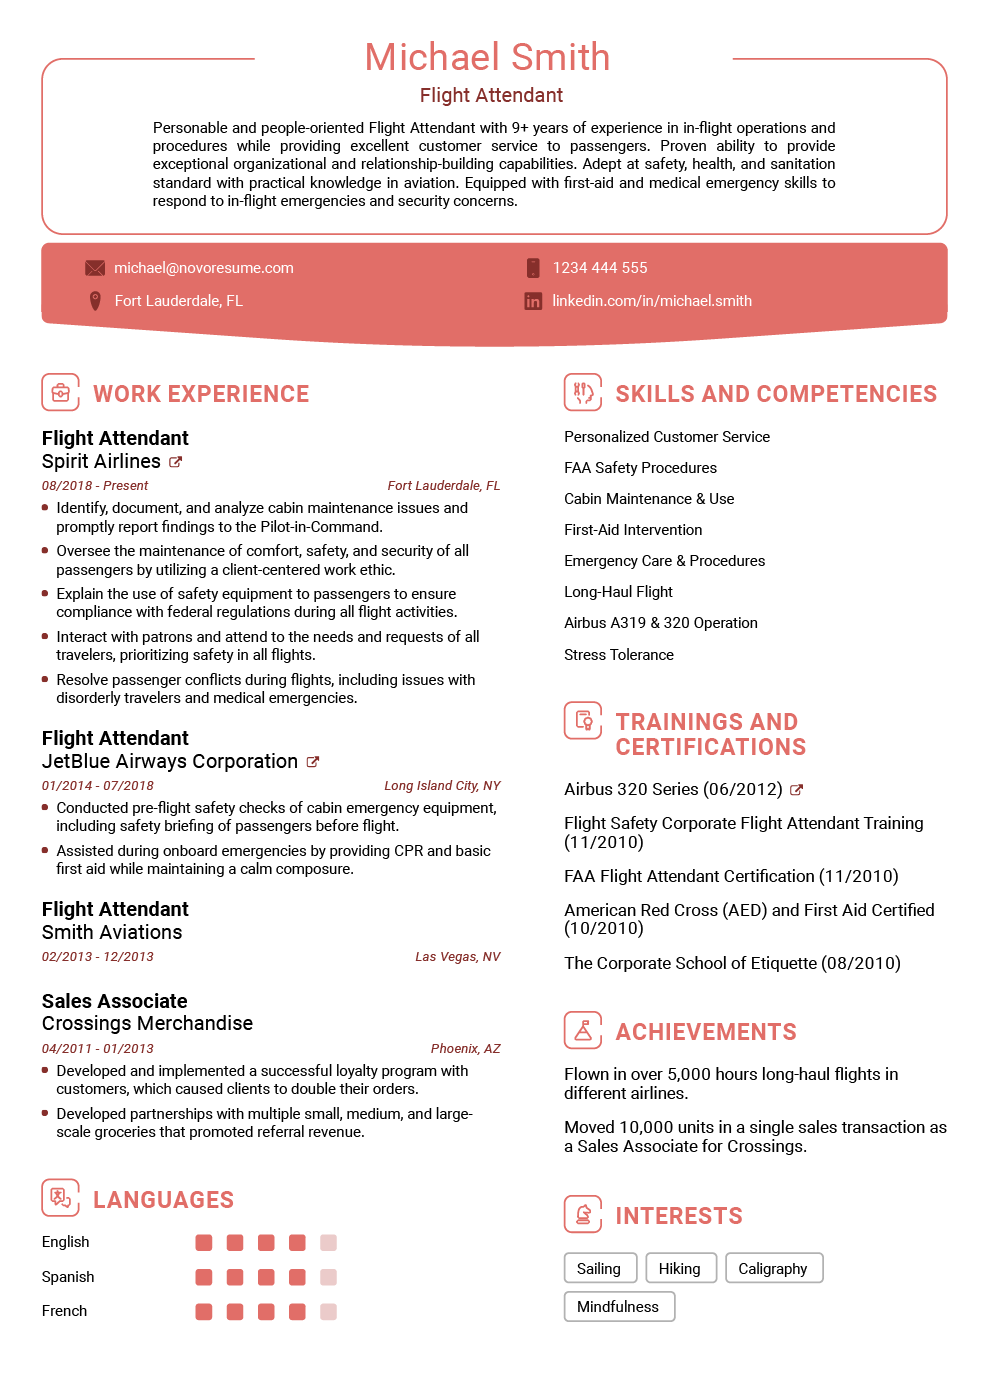 resume Blueprint - Rinse And Repeat